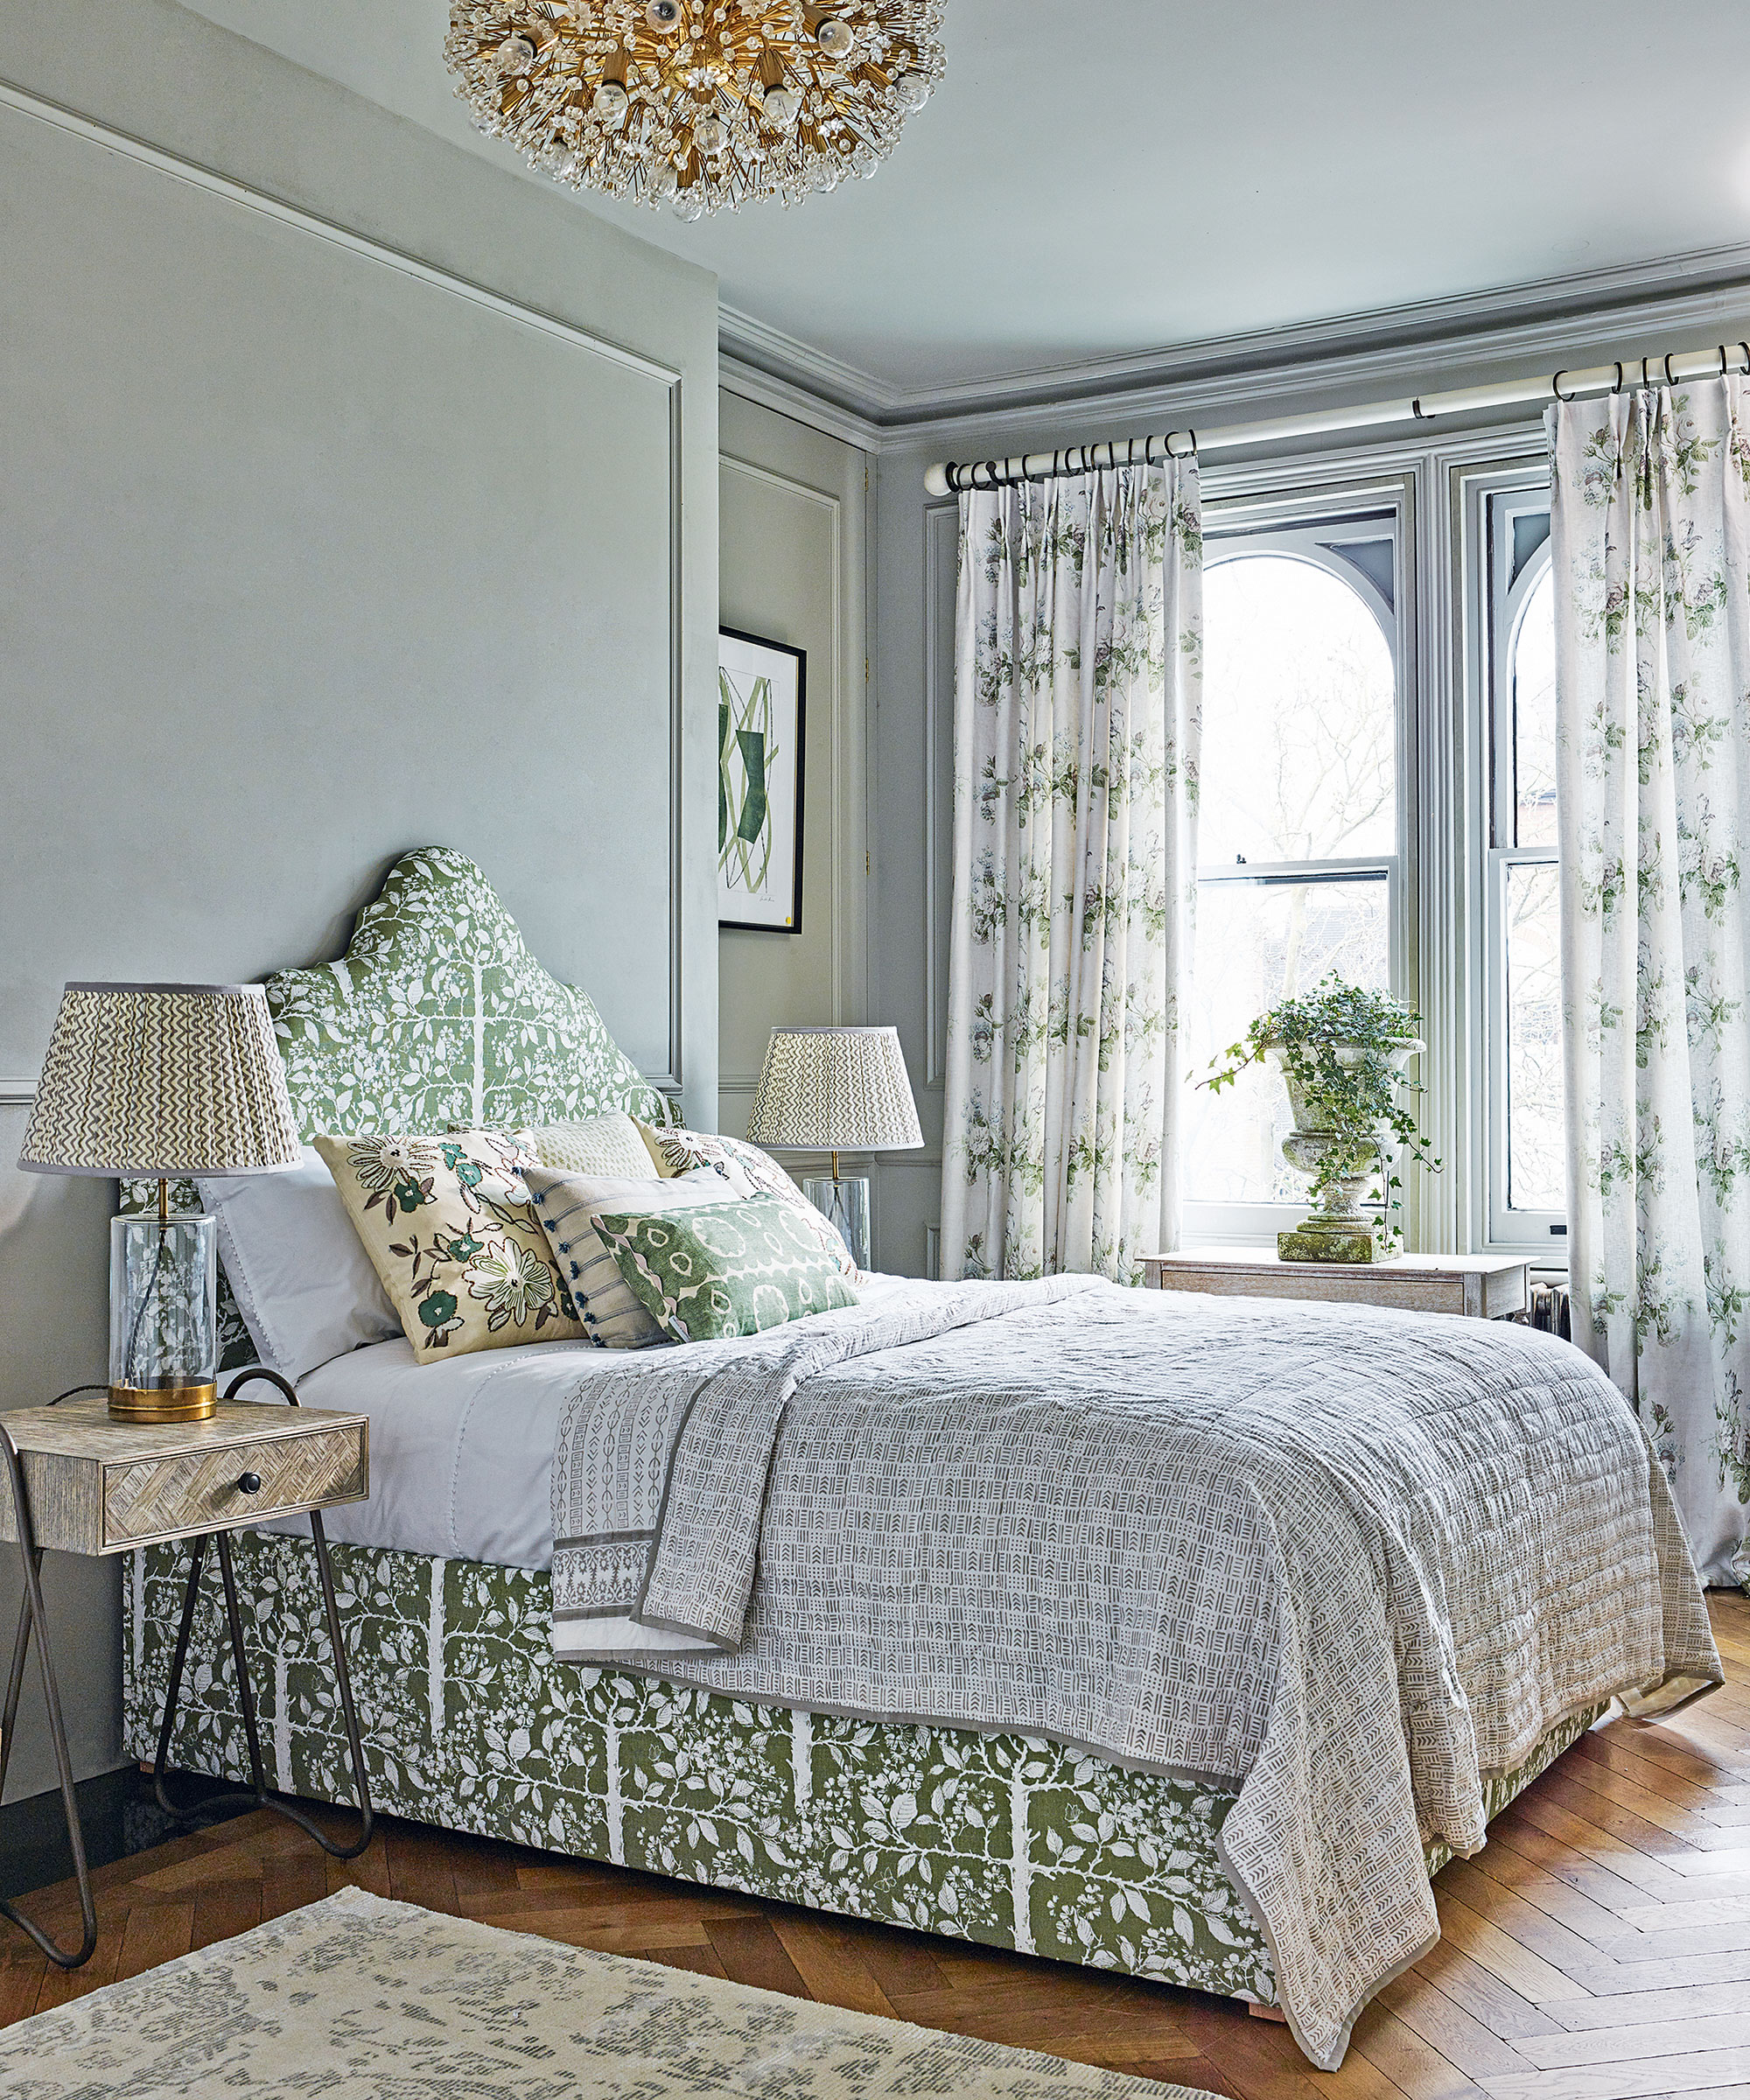 Luxury bedroom ideas with decorative bedding, ceiling light and curtains in green botanical print.